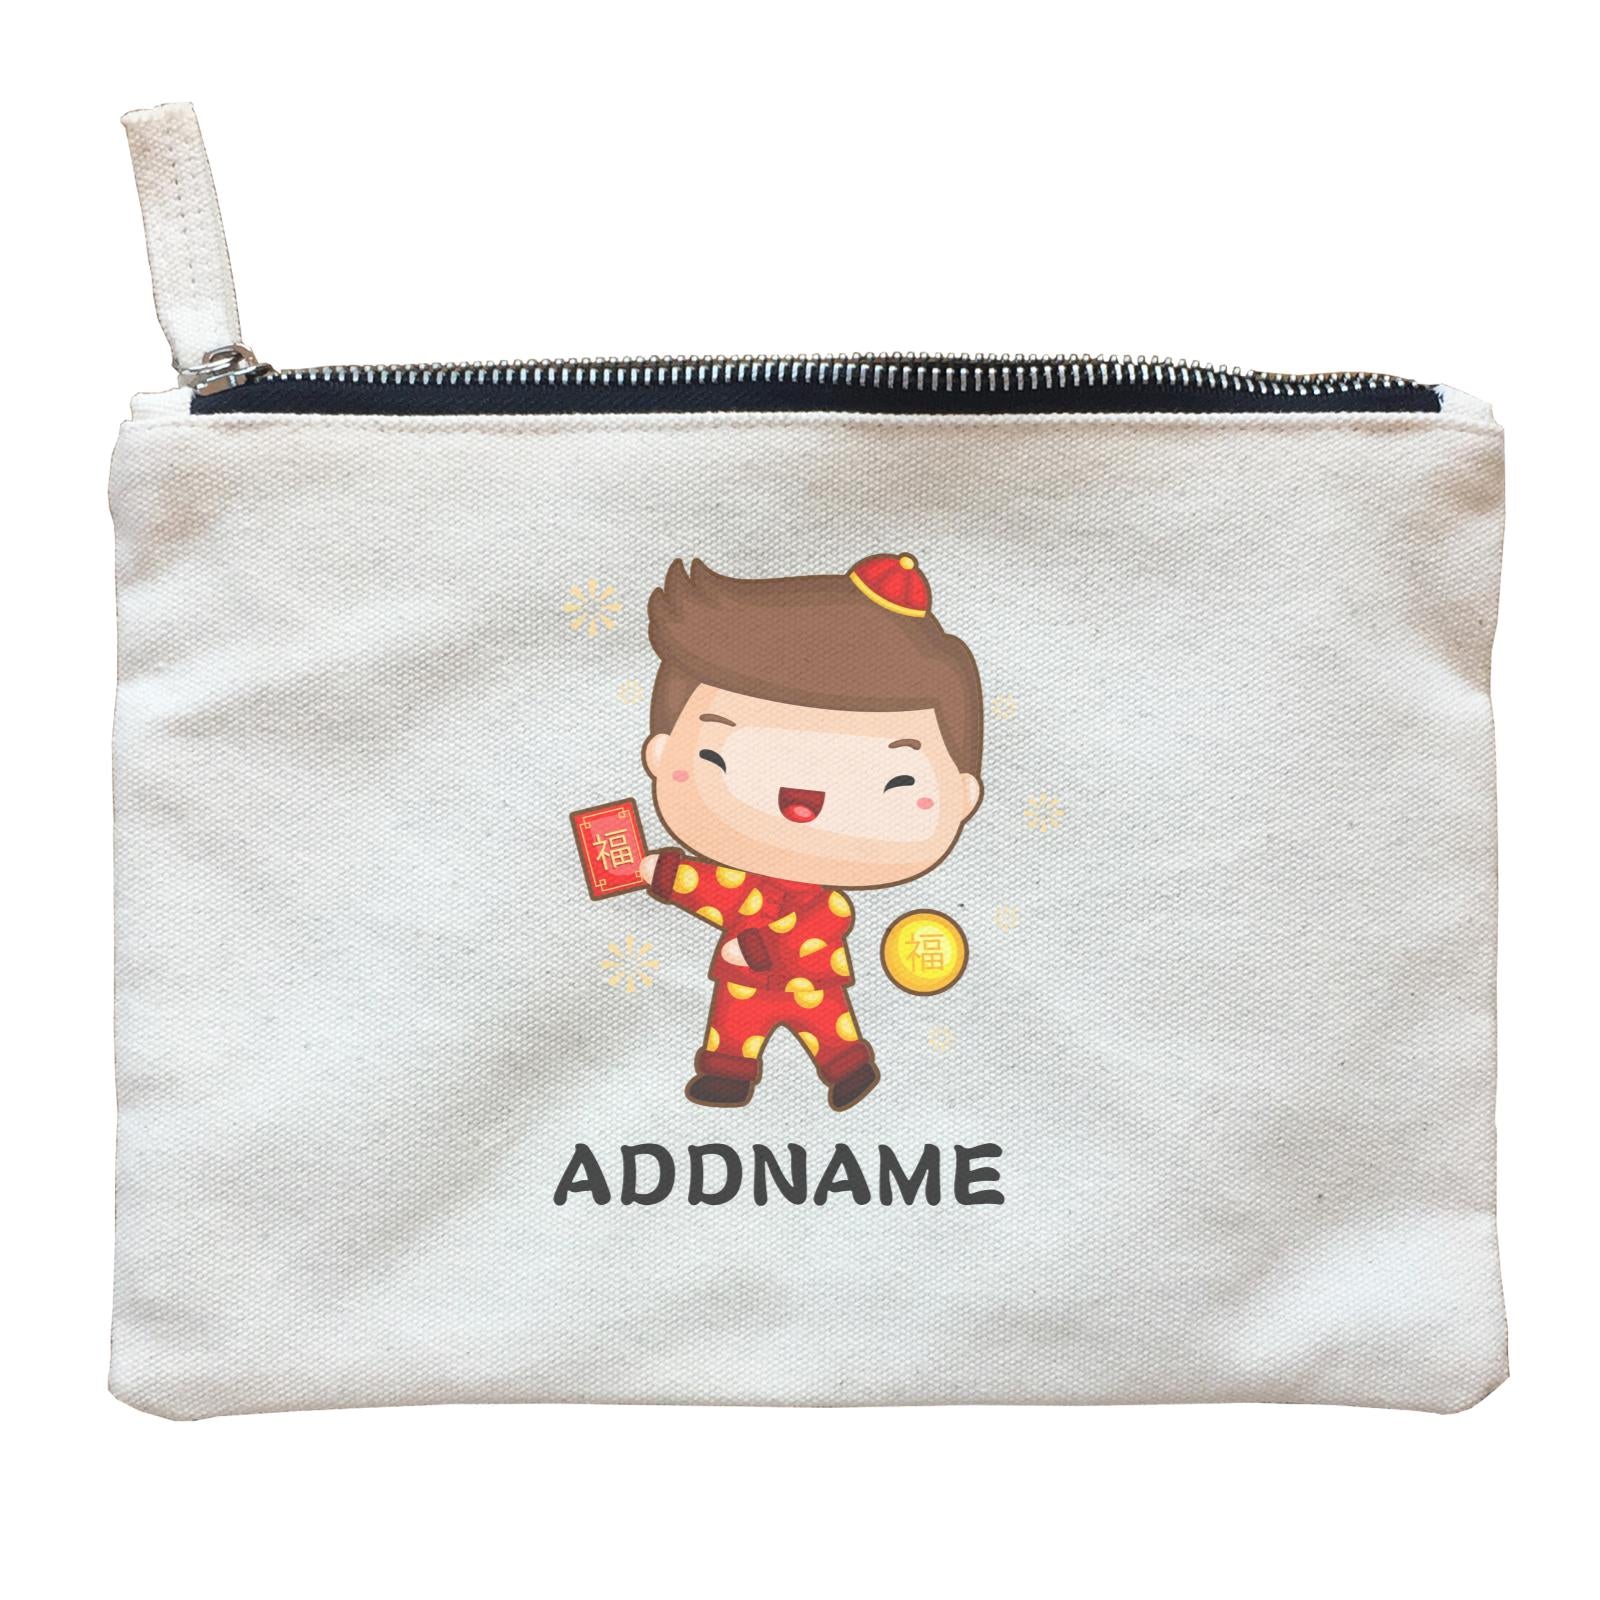 Cute CNY Boy with Red Packet and Happiness Symbol Zipper Pouch